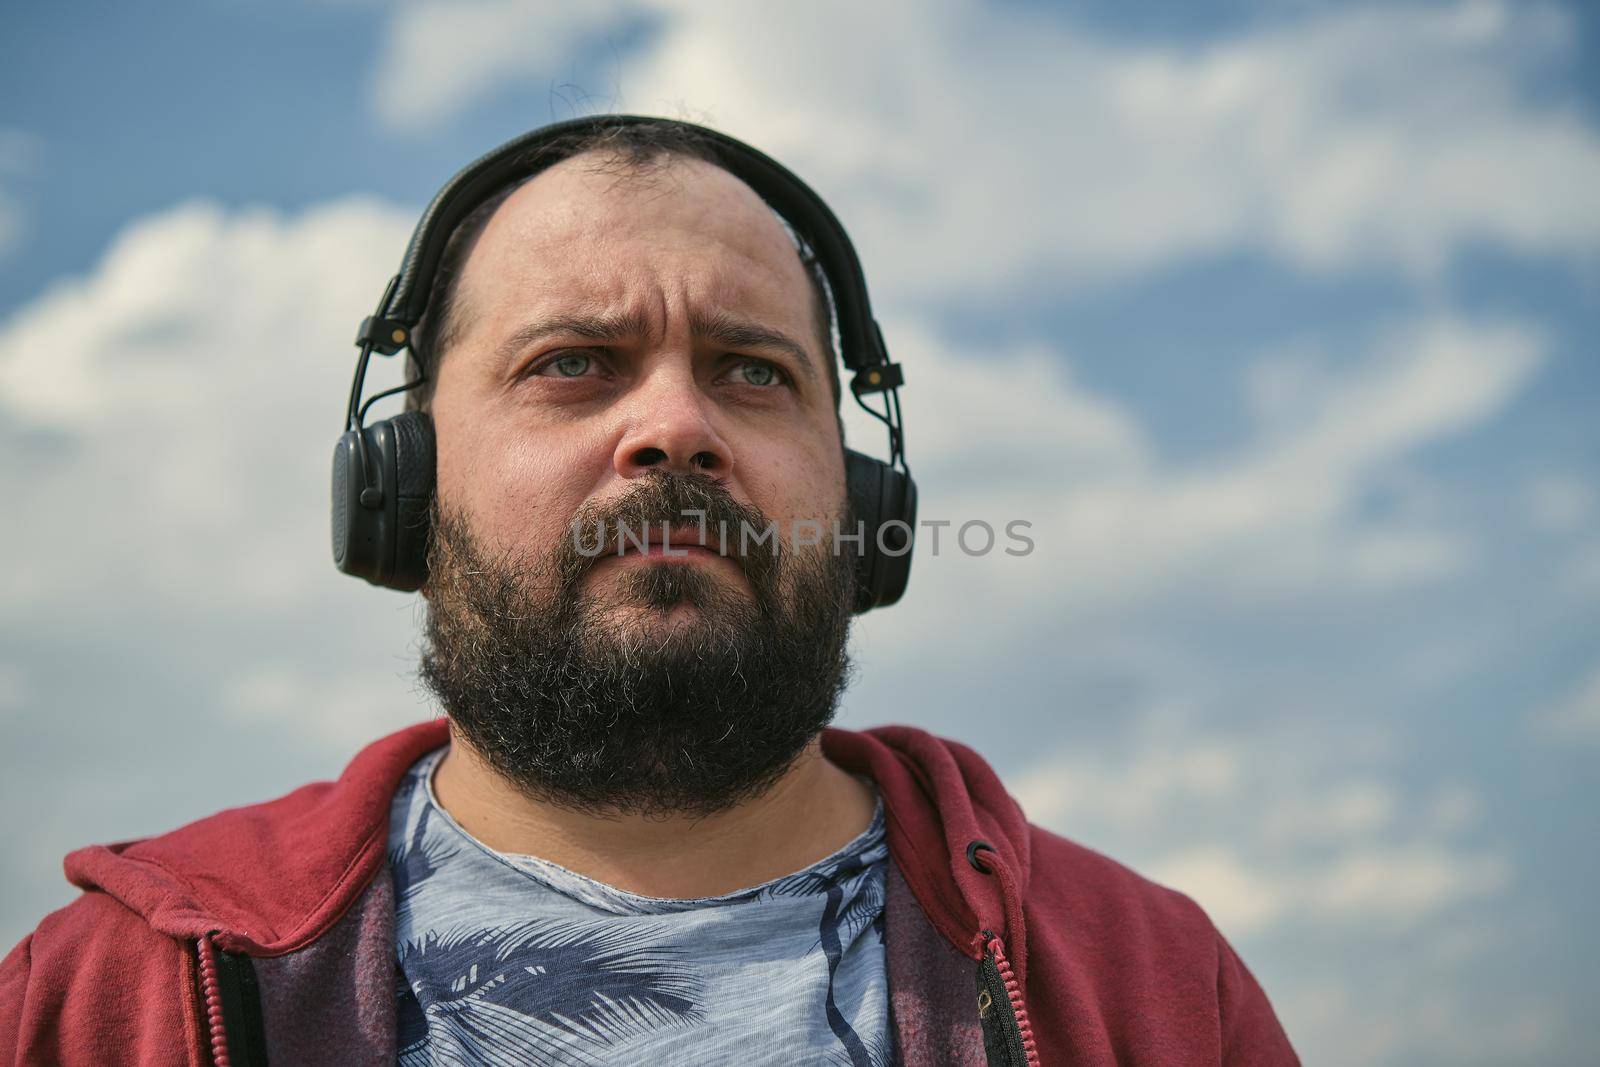 Middle-aged European man in headphones outdoors listening to music against the background of the sky